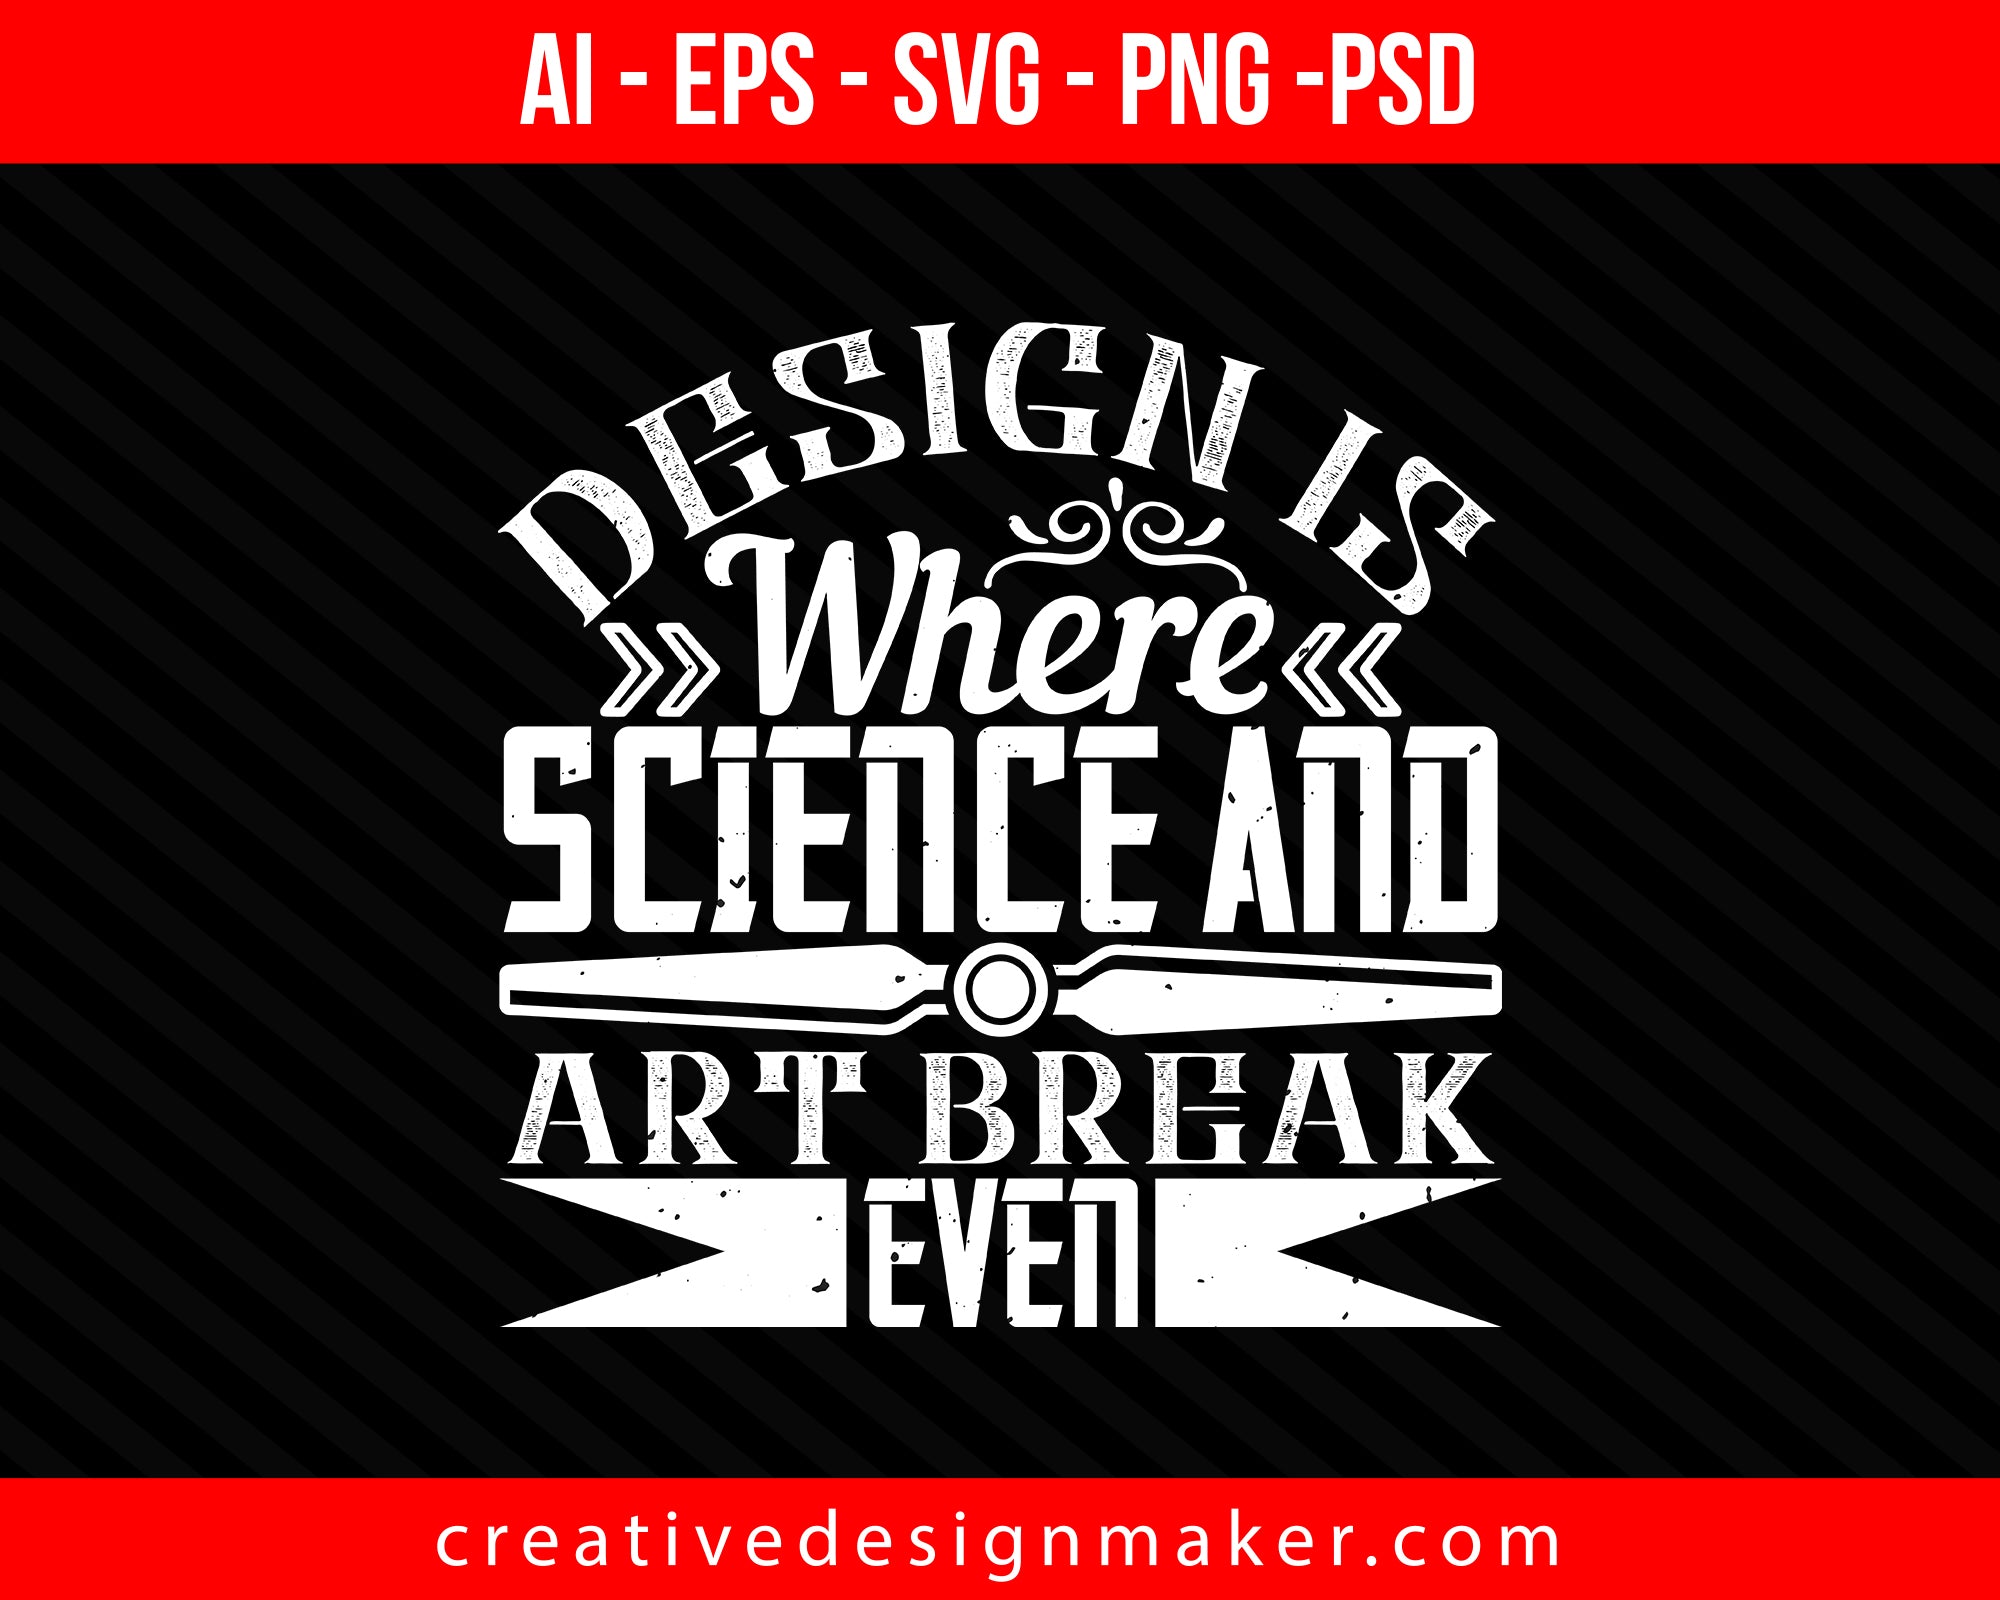 Design is where science and art break even Architect Print Ready Editable T-Shirt SVG Design!